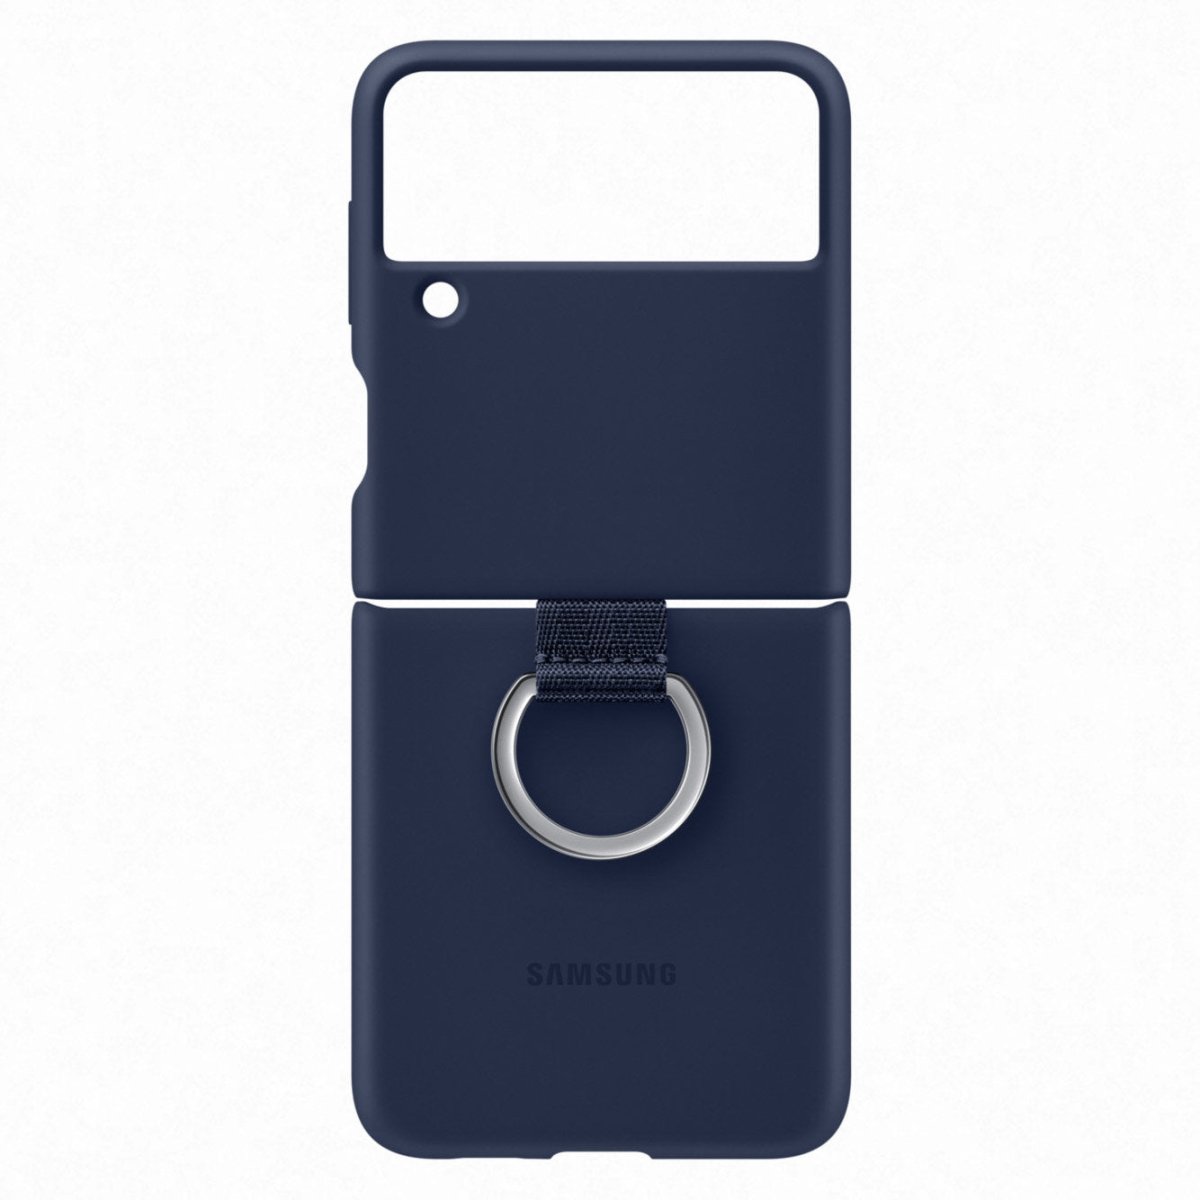 Best Samsung Silicone Case with Ring for Samsung In Pakistan